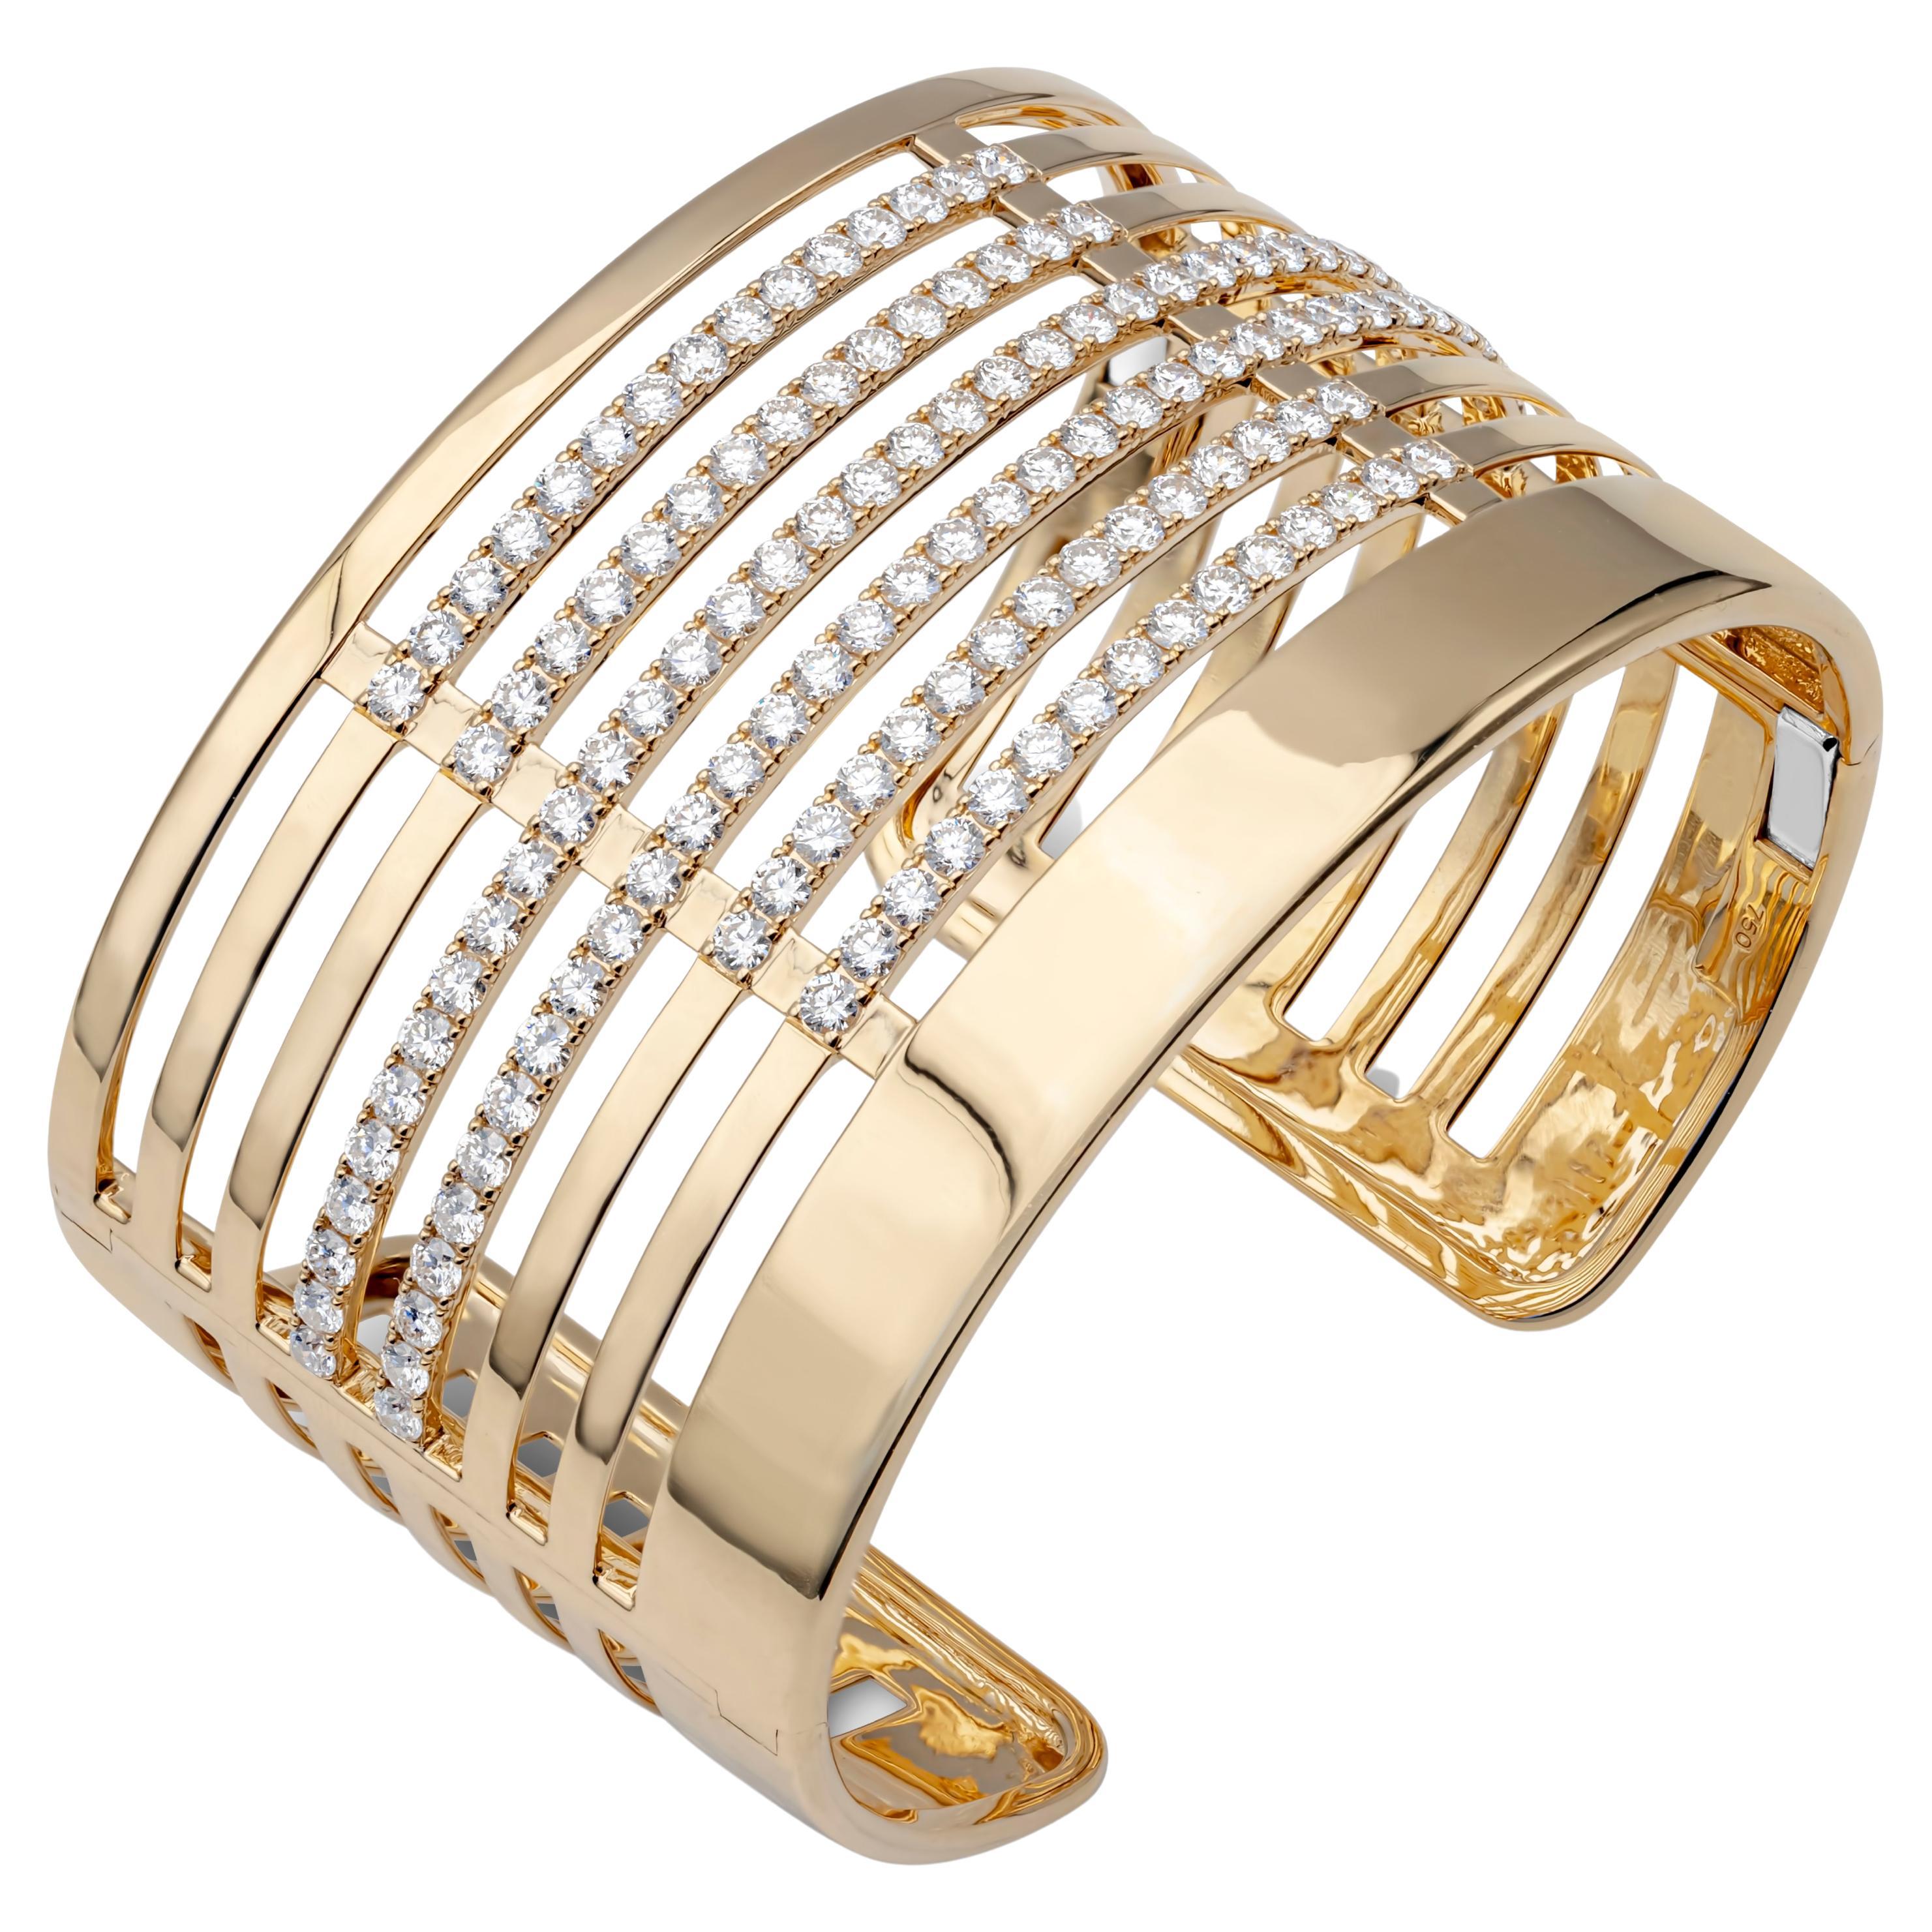 Showcasing a stylish and stunning 18k yellow gold bangle bracelet accented with 130 brilliant round diamond weighing 6.69 carats total, F-G color and VS-SI in clarity, set in a timeless open-work large cuff design. 6.5 inches in length and 40mm